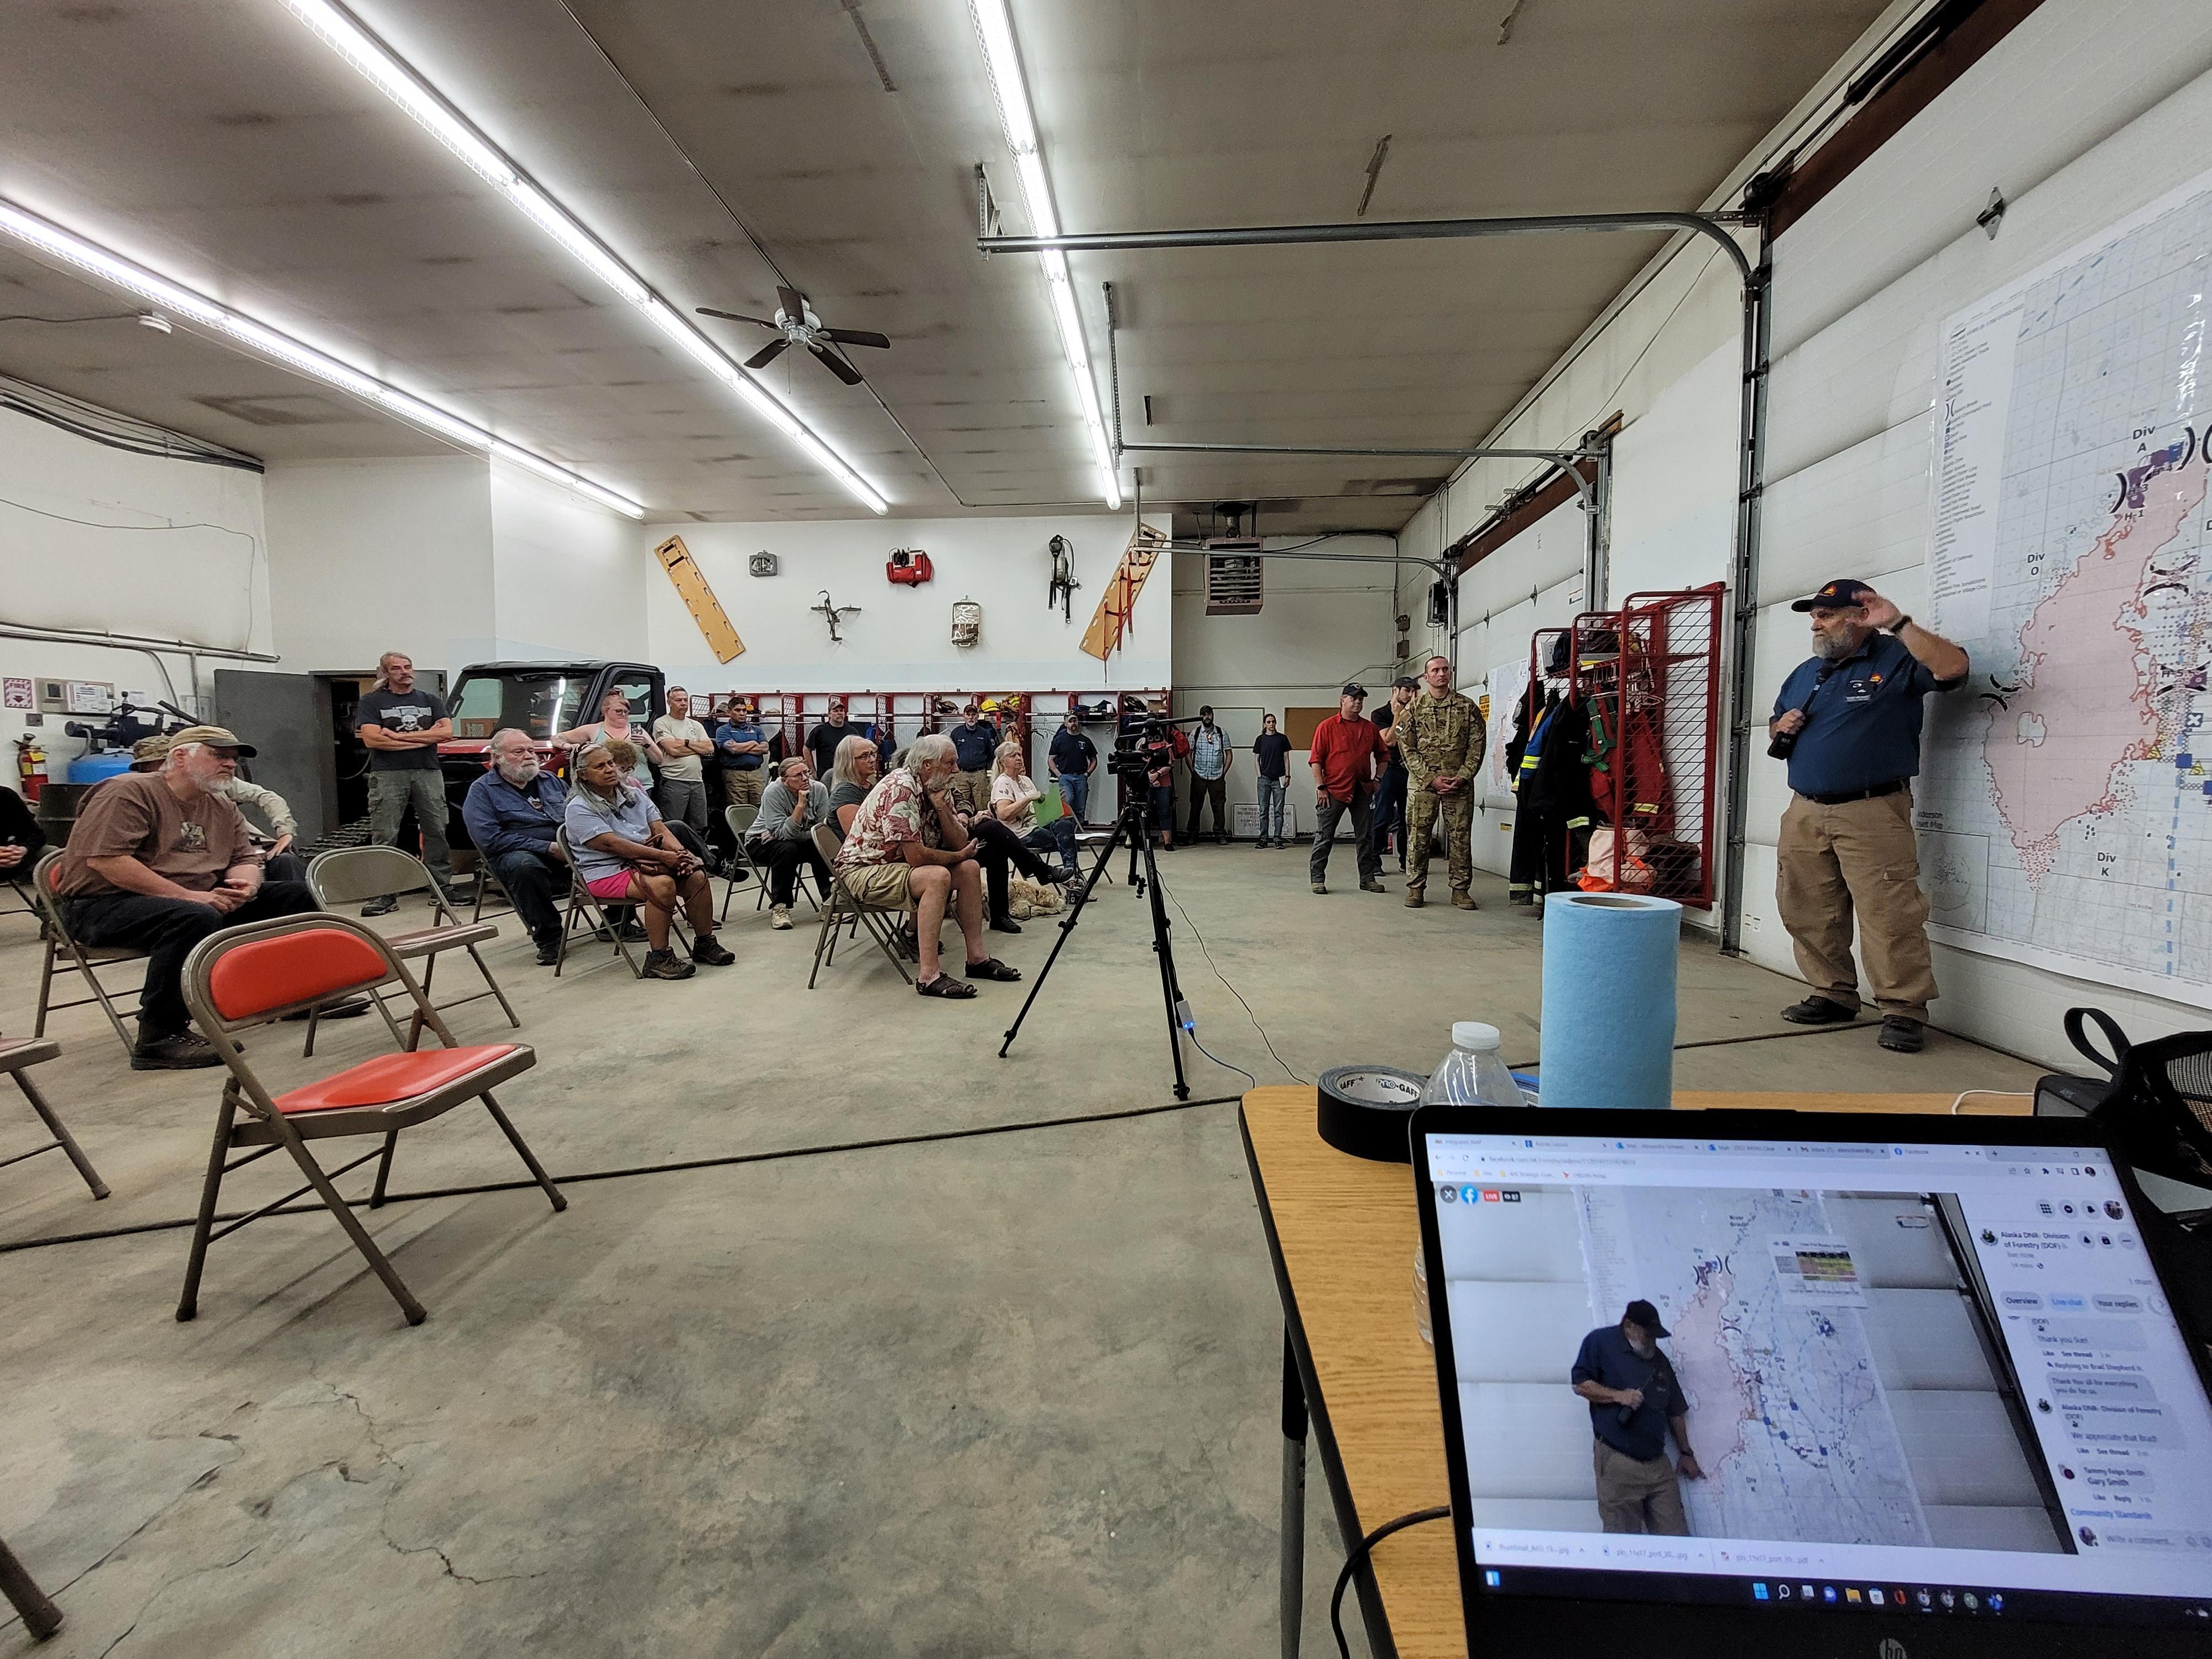 July 2nd Community Meeting at Anderson Fire Hall